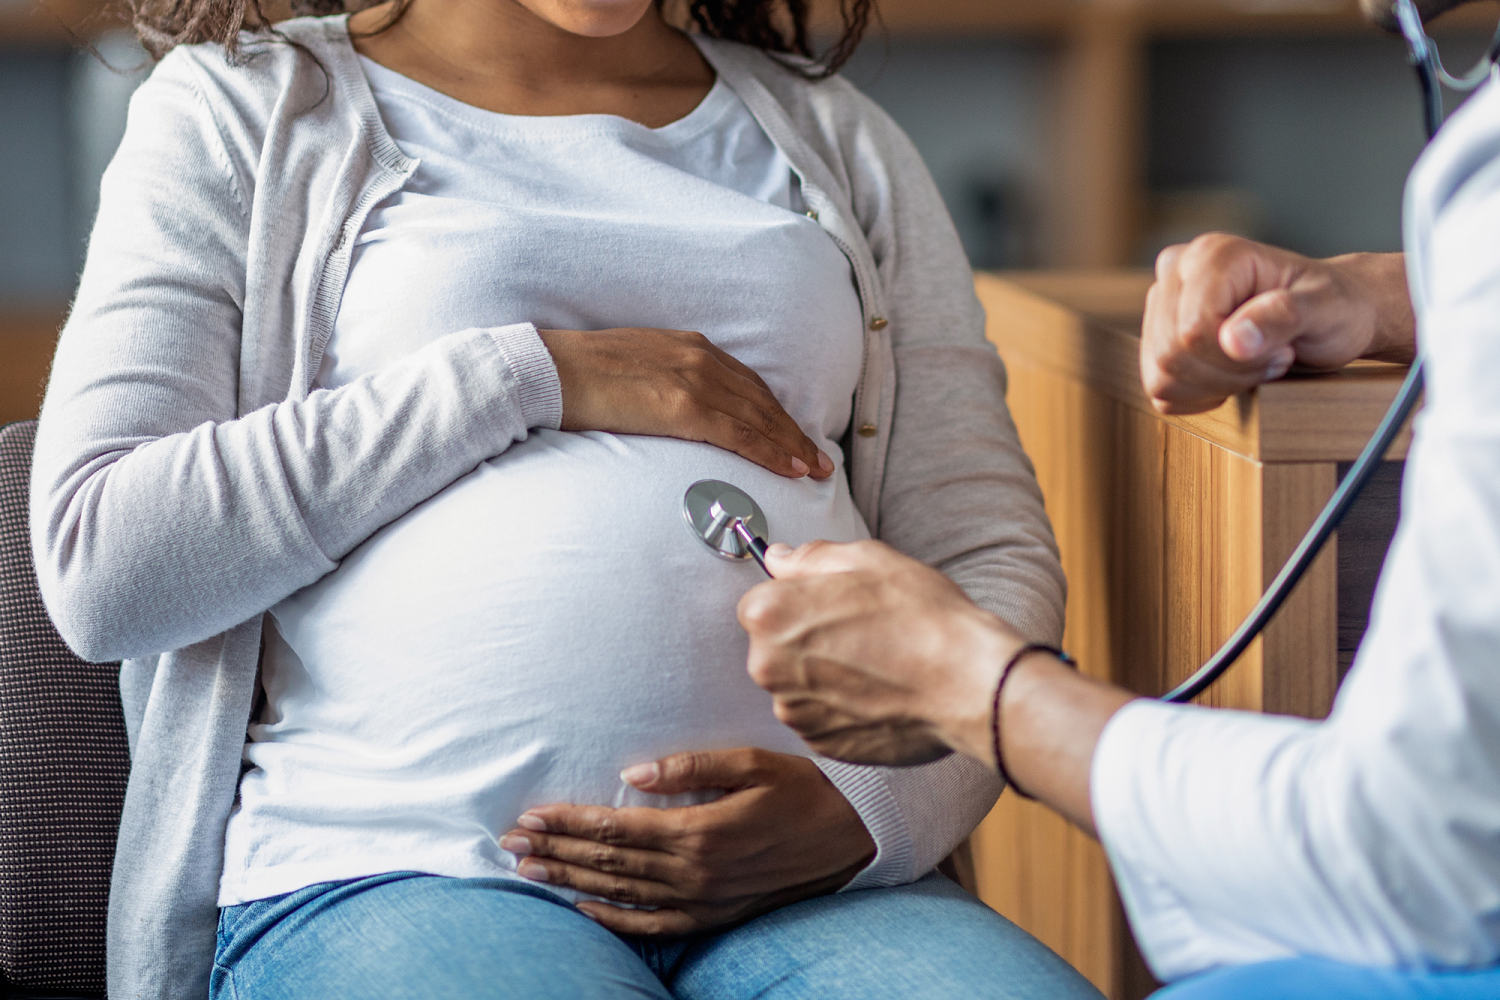 Black woman may prefer Black OB-GYNs due to fear of discrimination, dying during pregnancy